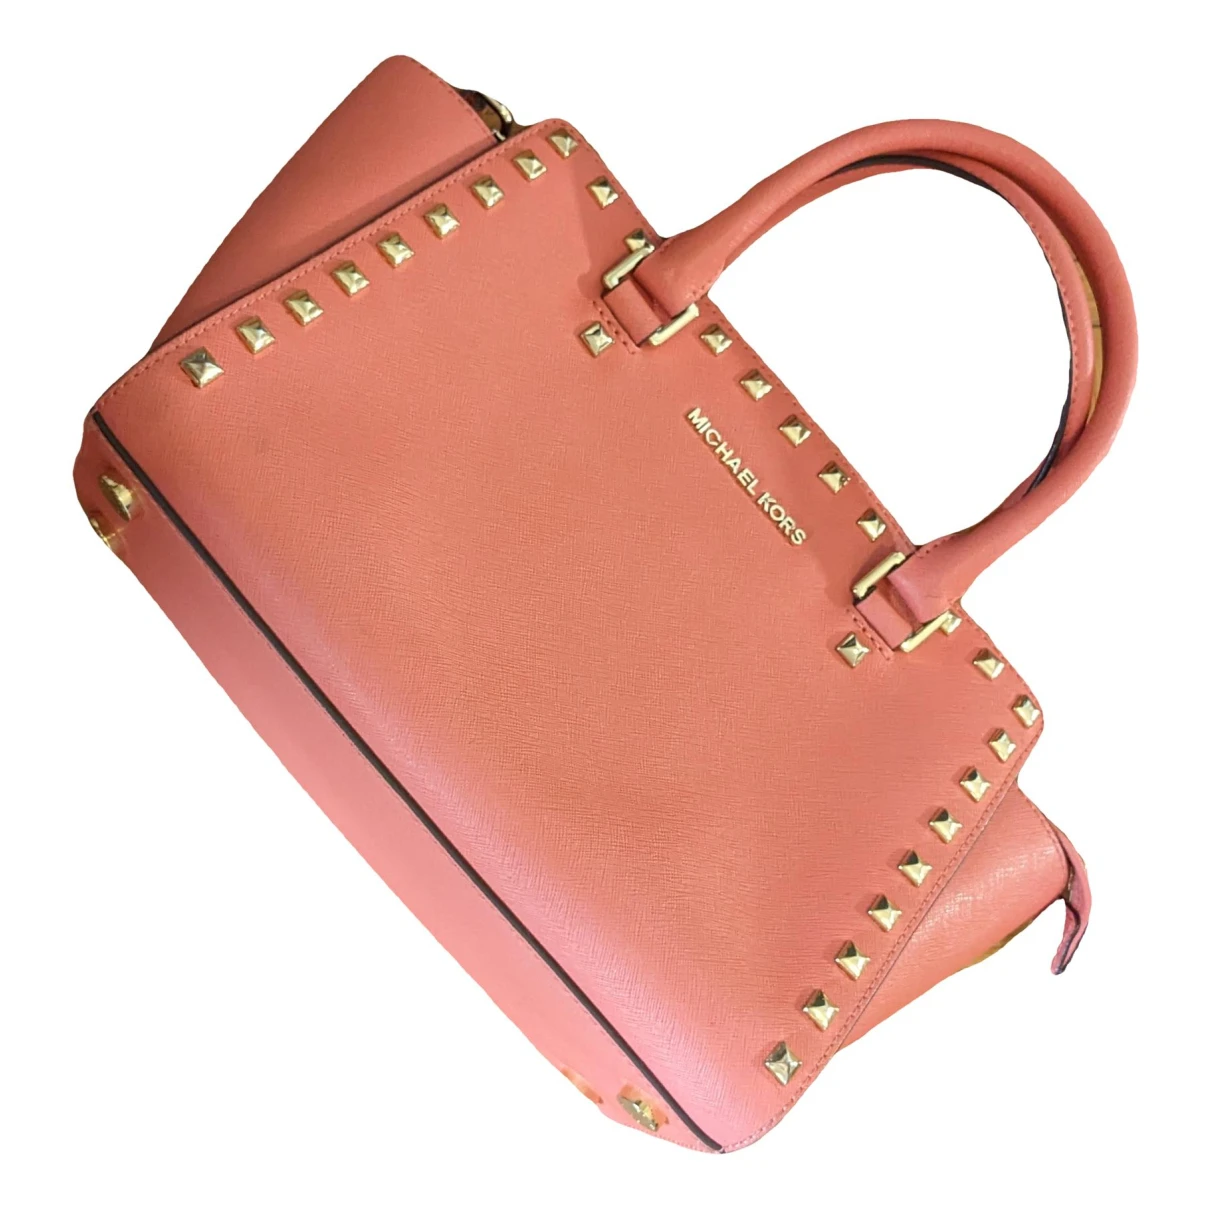 Pre-owned Michael Kors Selma Leather Tote In Pink